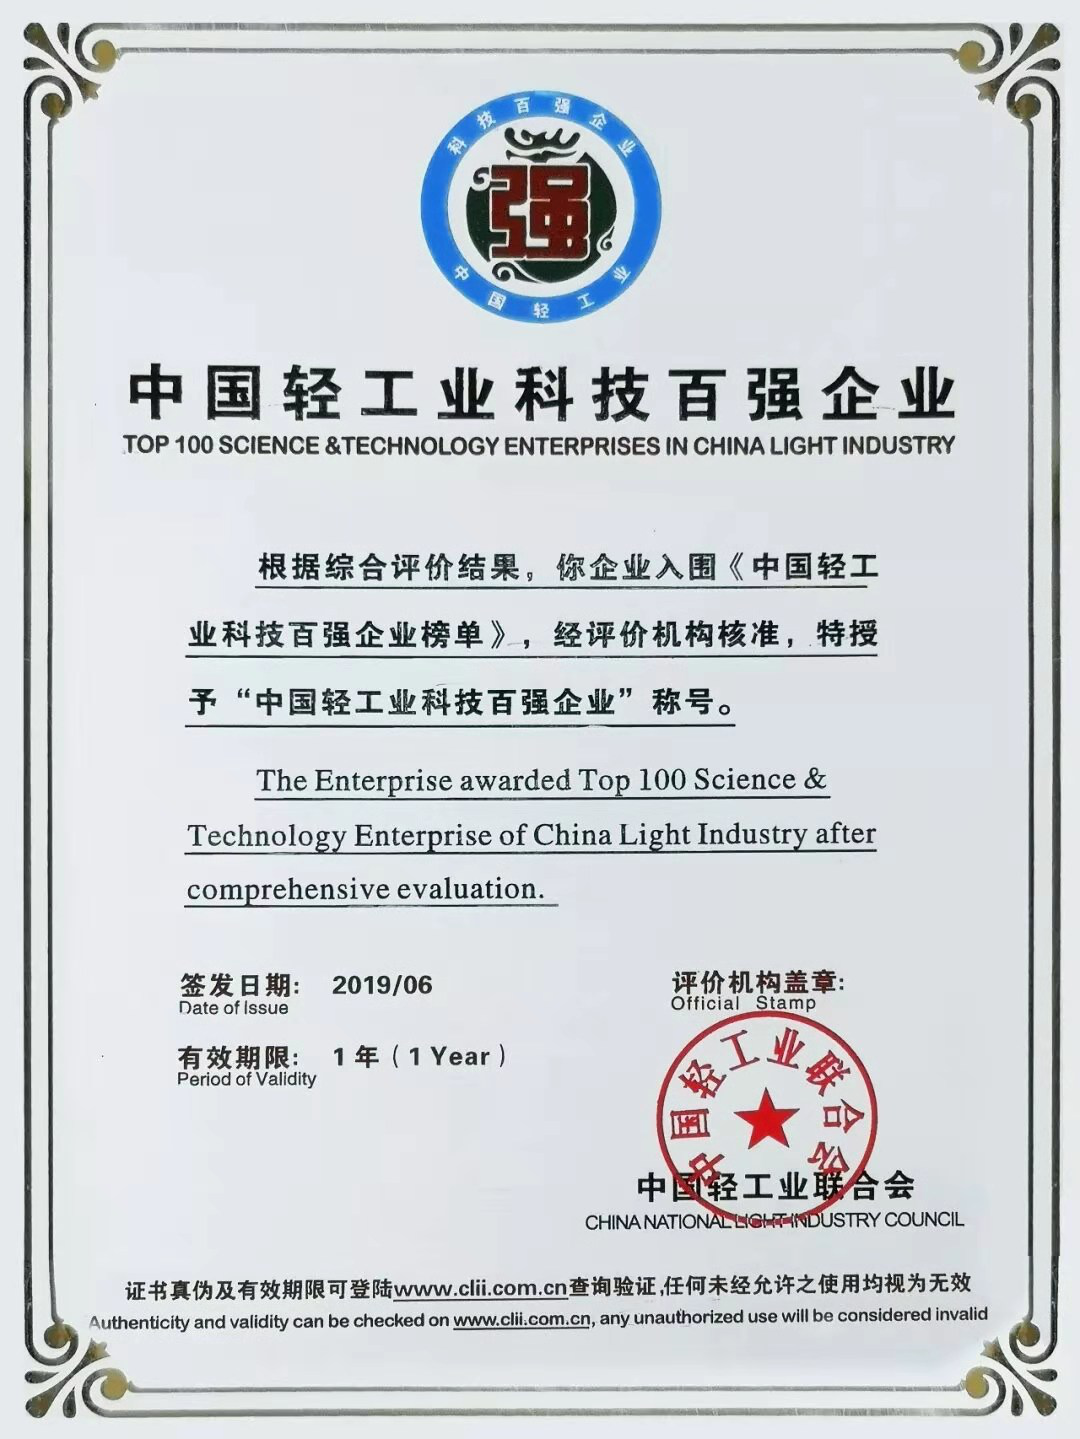 Congratulatonhi Sold Company Is Awarded The Title Of Top 100enterprise Sceience & Technology Of Light Industry In China